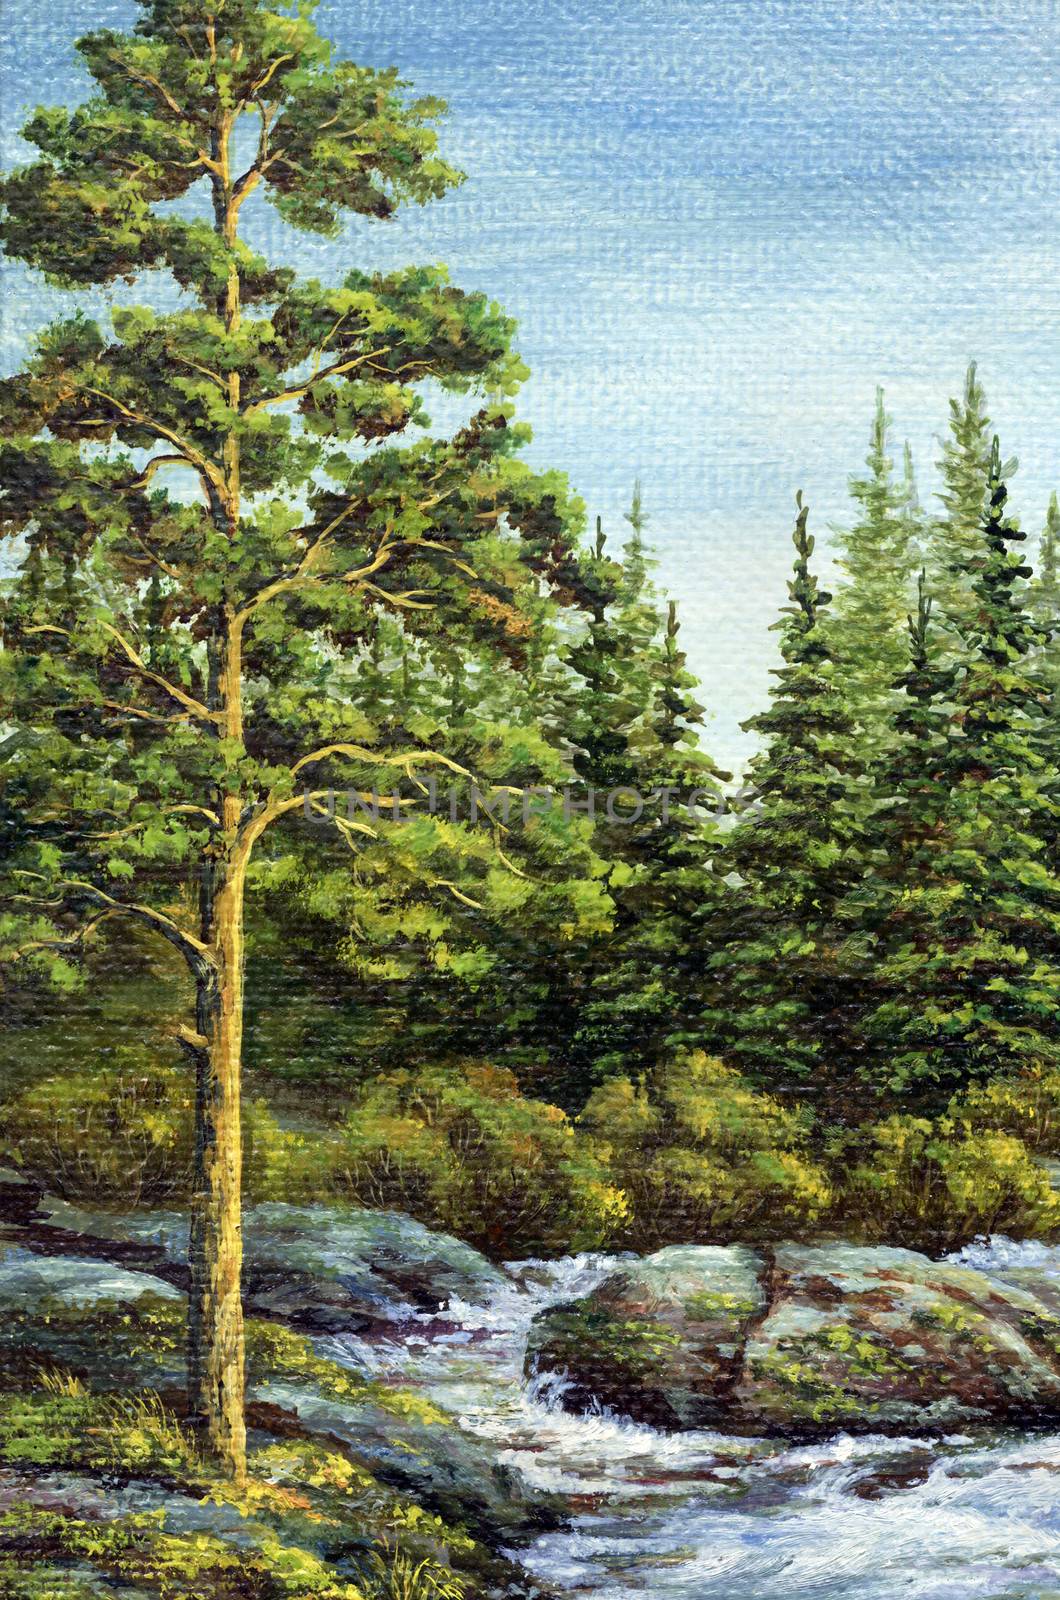 Painting, picture oil paints on a canvas. Landscape, mountain river. Altai, Russia